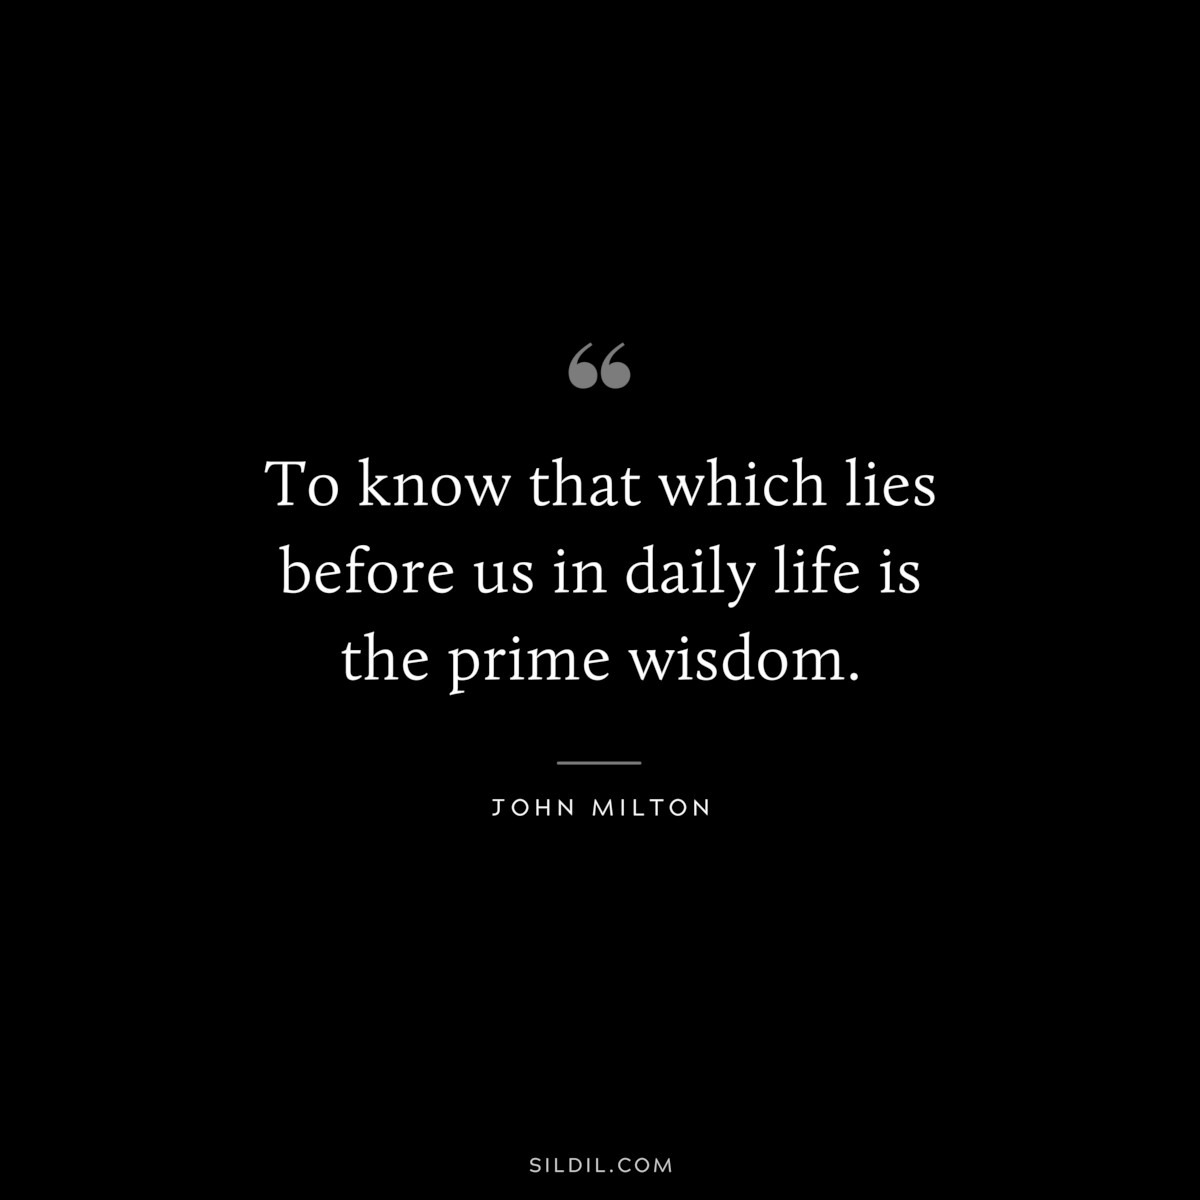 To know that which lies before us in daily life is the prime wisdom. ― John Milton